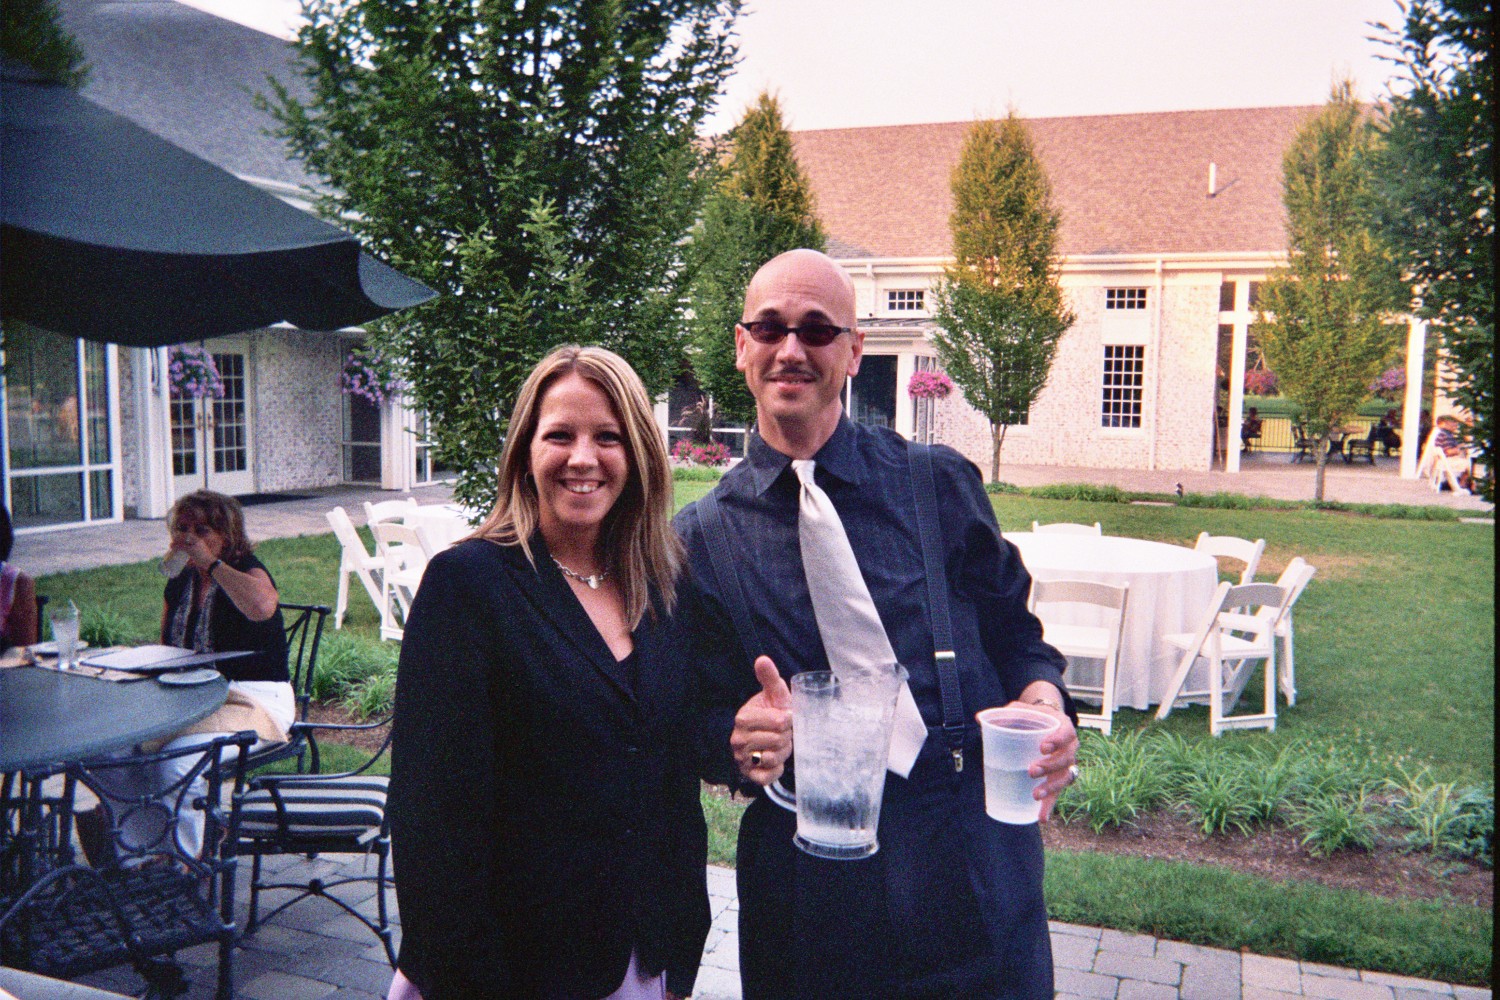 Host Kathy with Mitch at the West Shore Country Club
